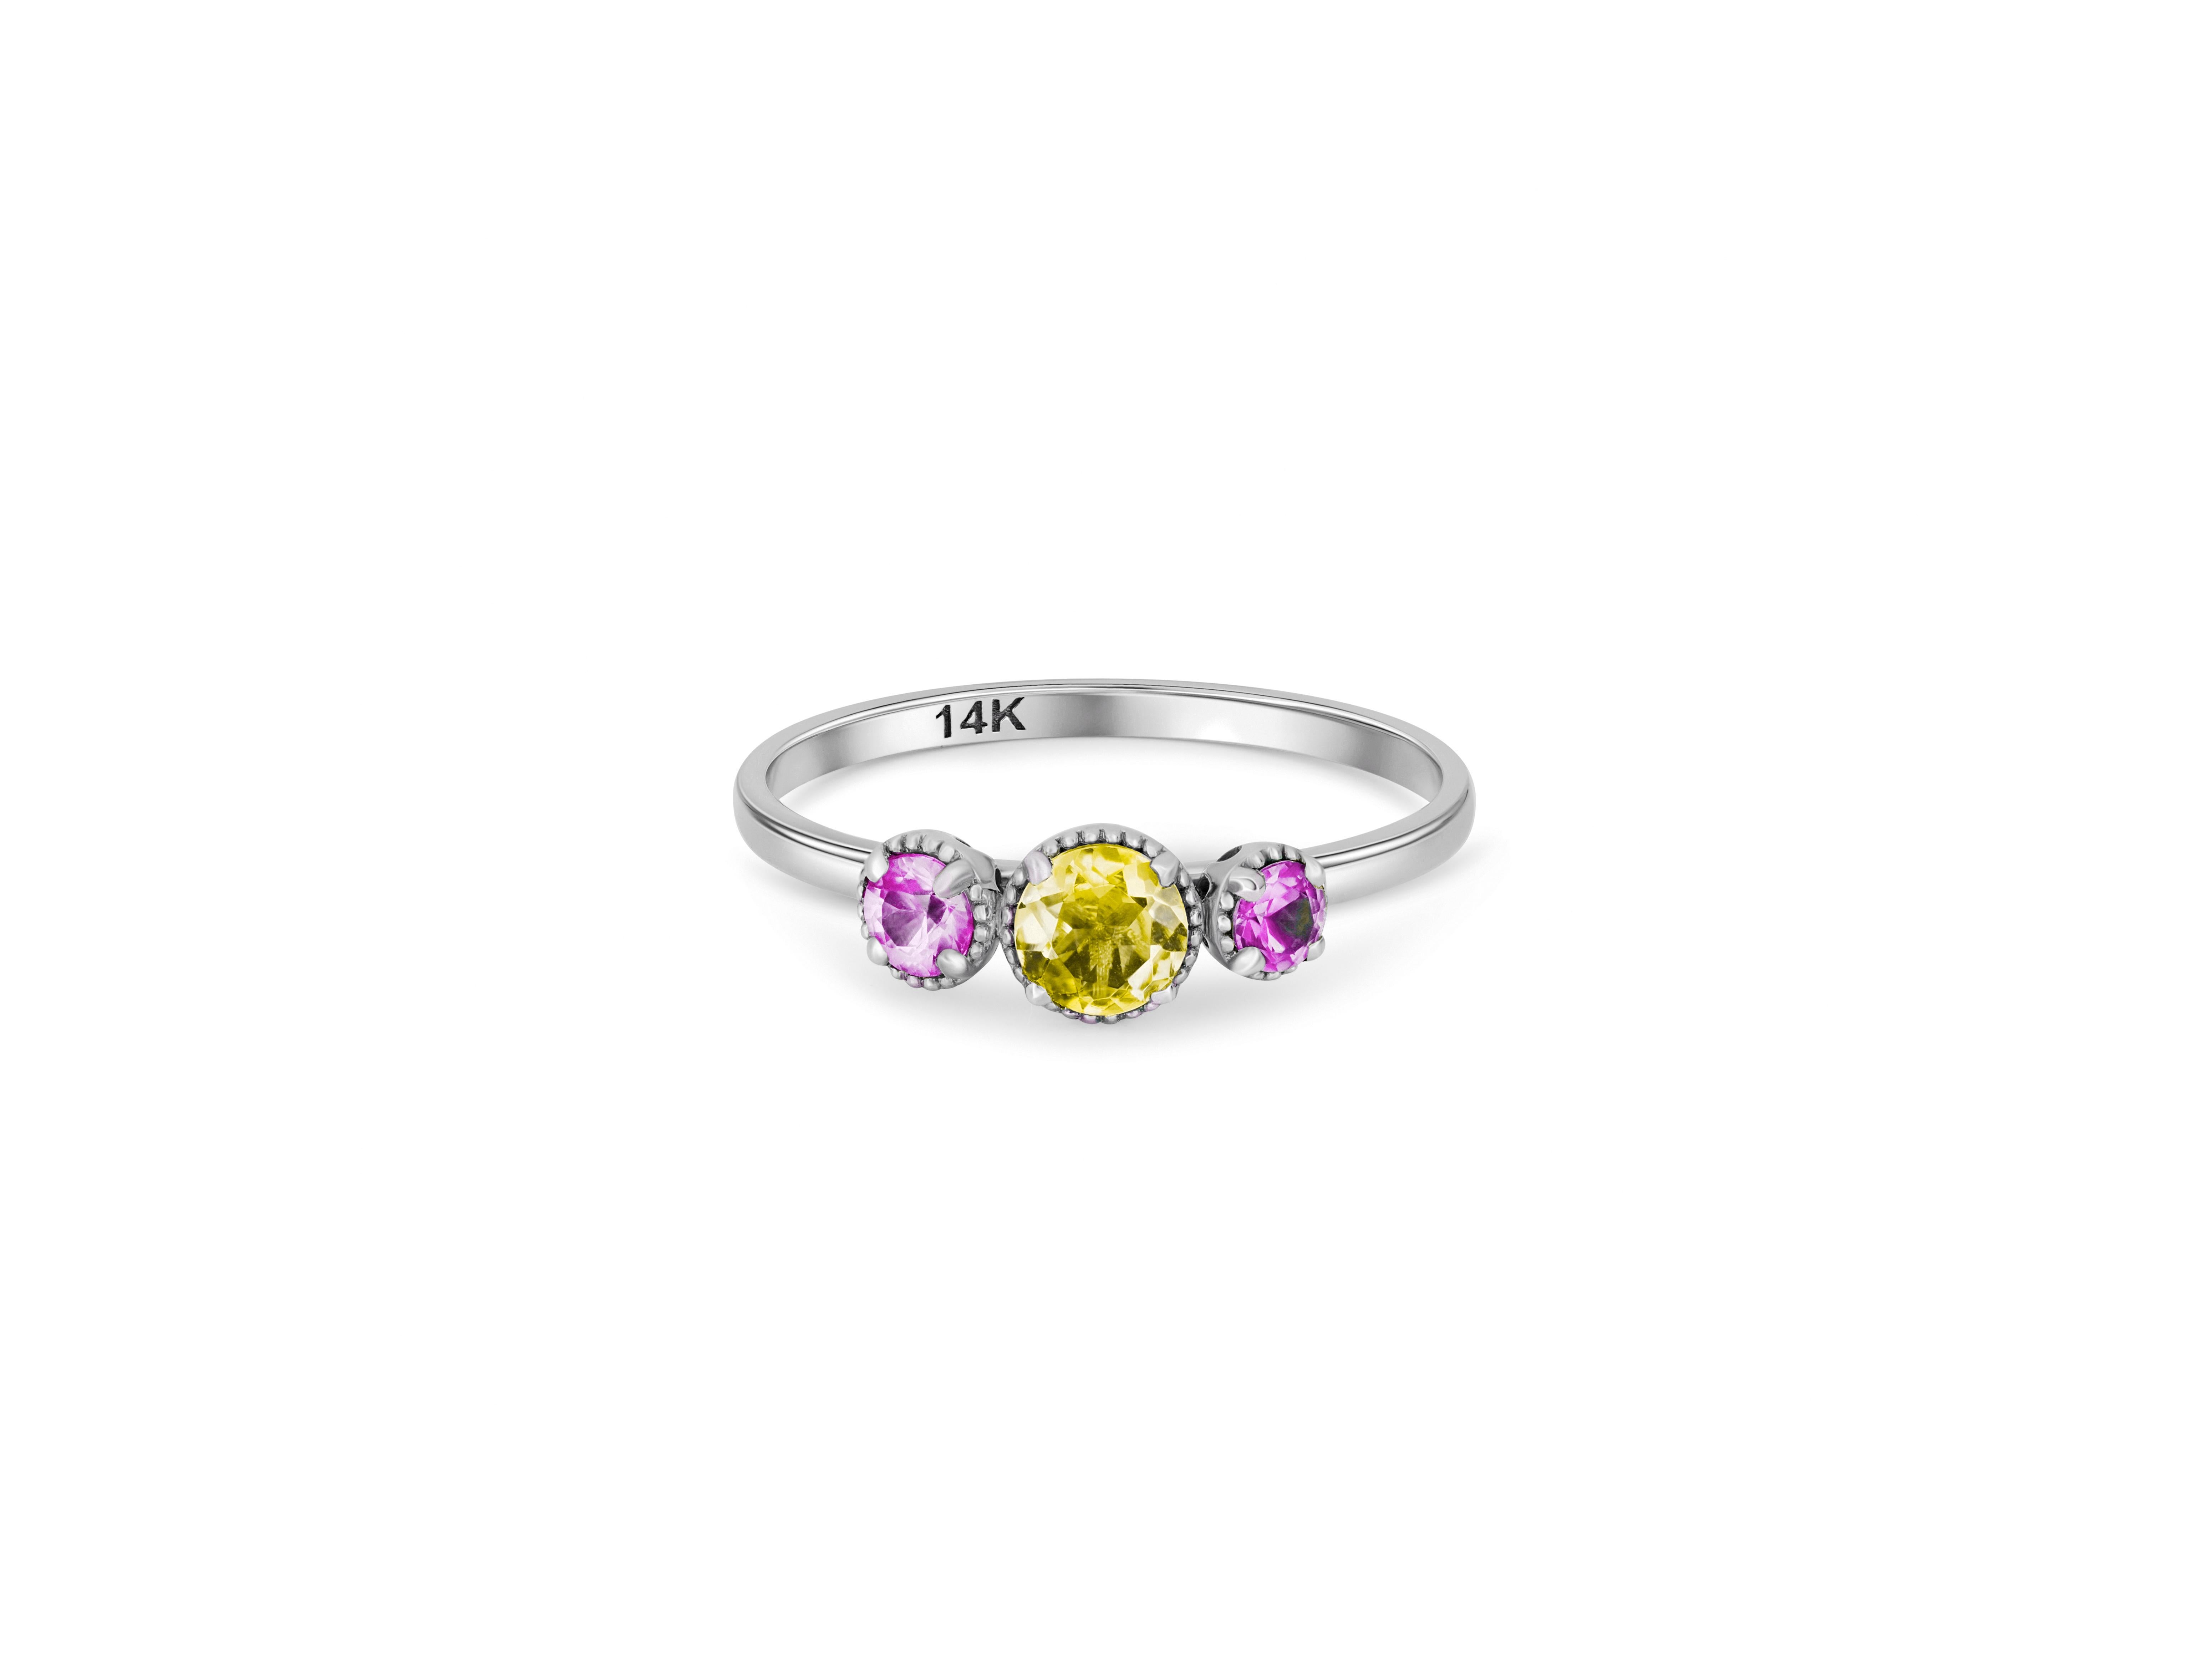 Trio gems 14k gold ring.
3 gemstone palette 14k gold ring. Amethyst and yellow sapphire 14k gold ring.  Color contrast gold ring. Purple and yellow gemstone ring. 

Metal: 14k gold
Weight: 1.8 gr depends from size

Gemstones:
Yellow: lab sapphire,